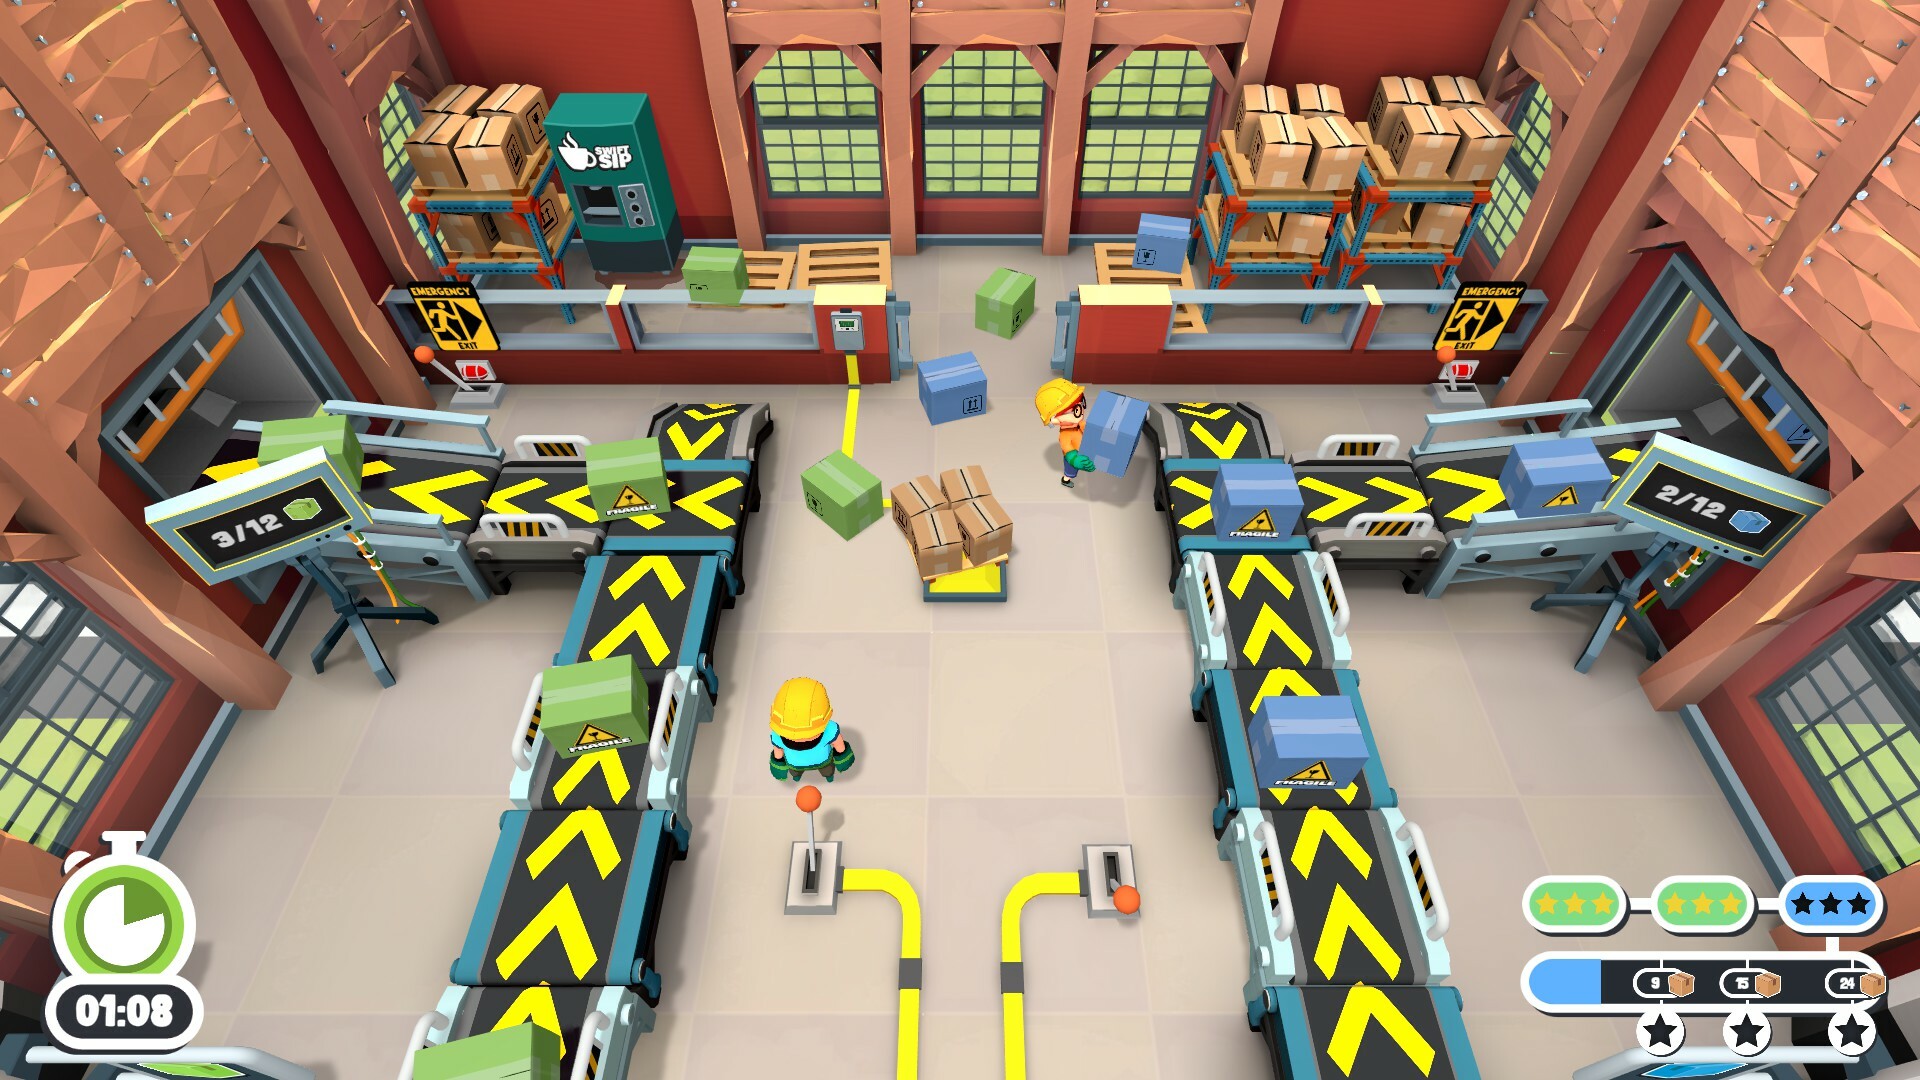  Here's a chaos co-op take on getting boxes off the shipping floor and out the factory door 